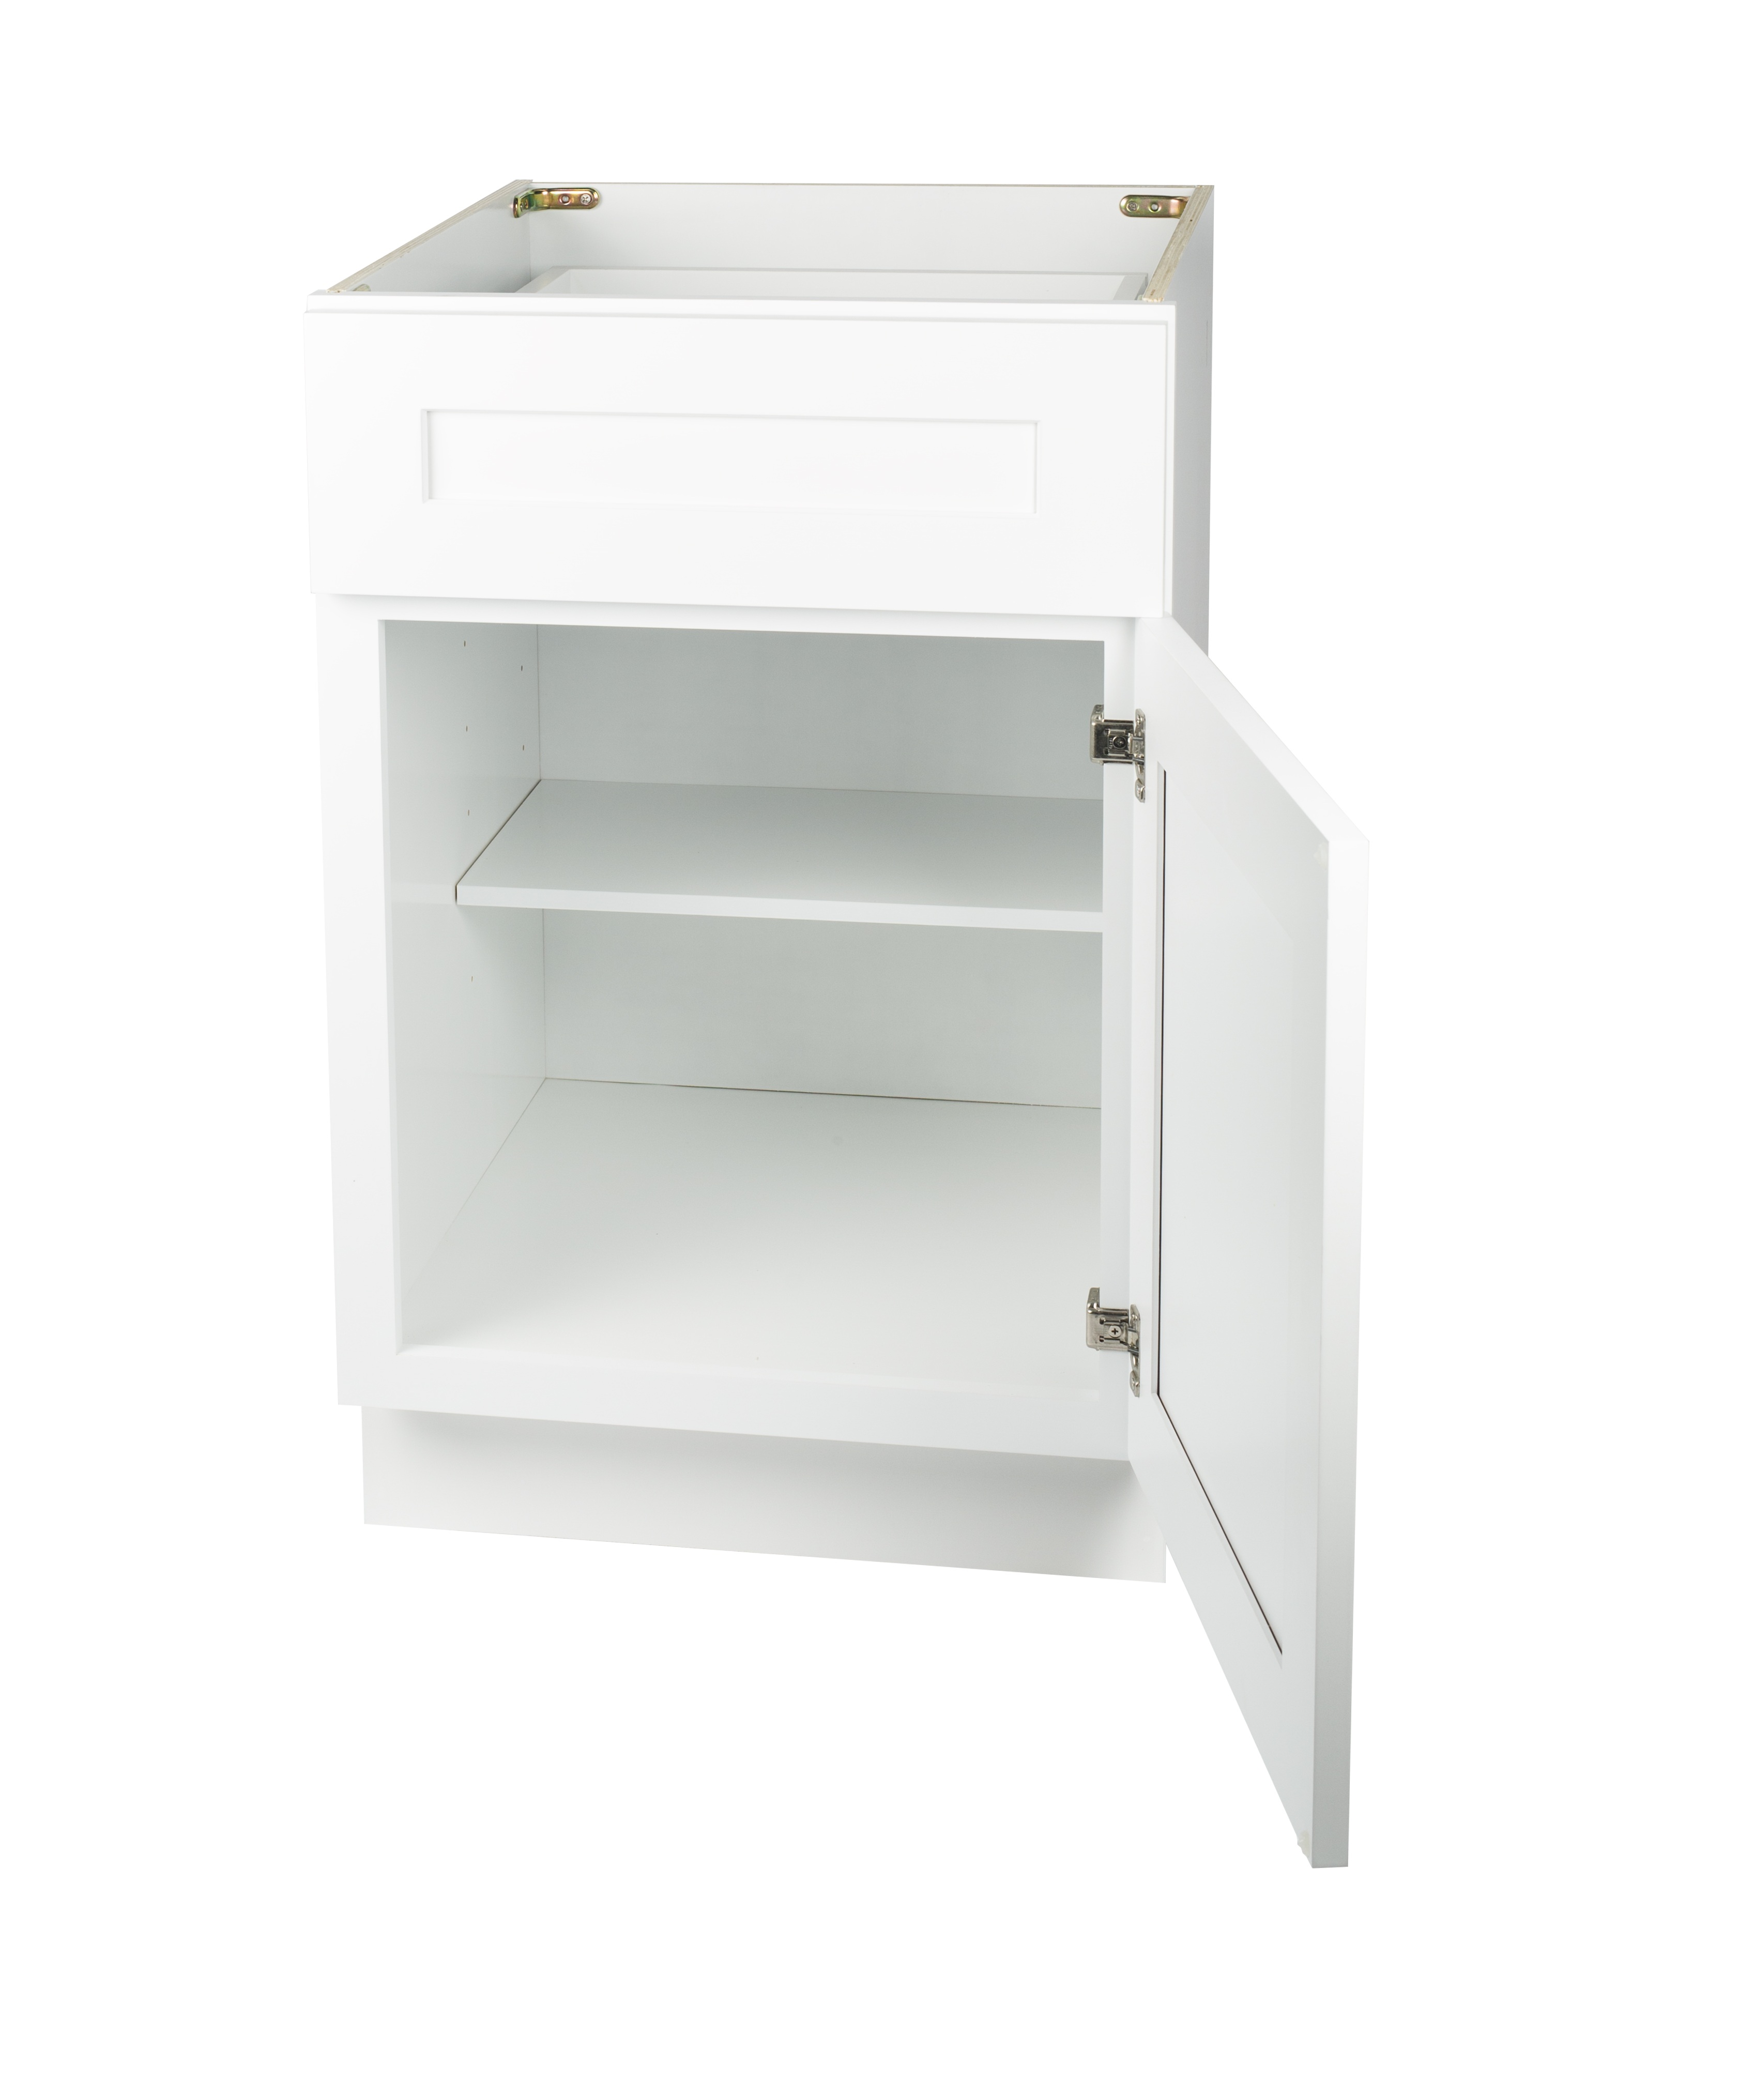 Ready to Assemble 15Wx34.5Hx24D in. Shaker Base Cabinet with 1 Door and 1 Drawer in White